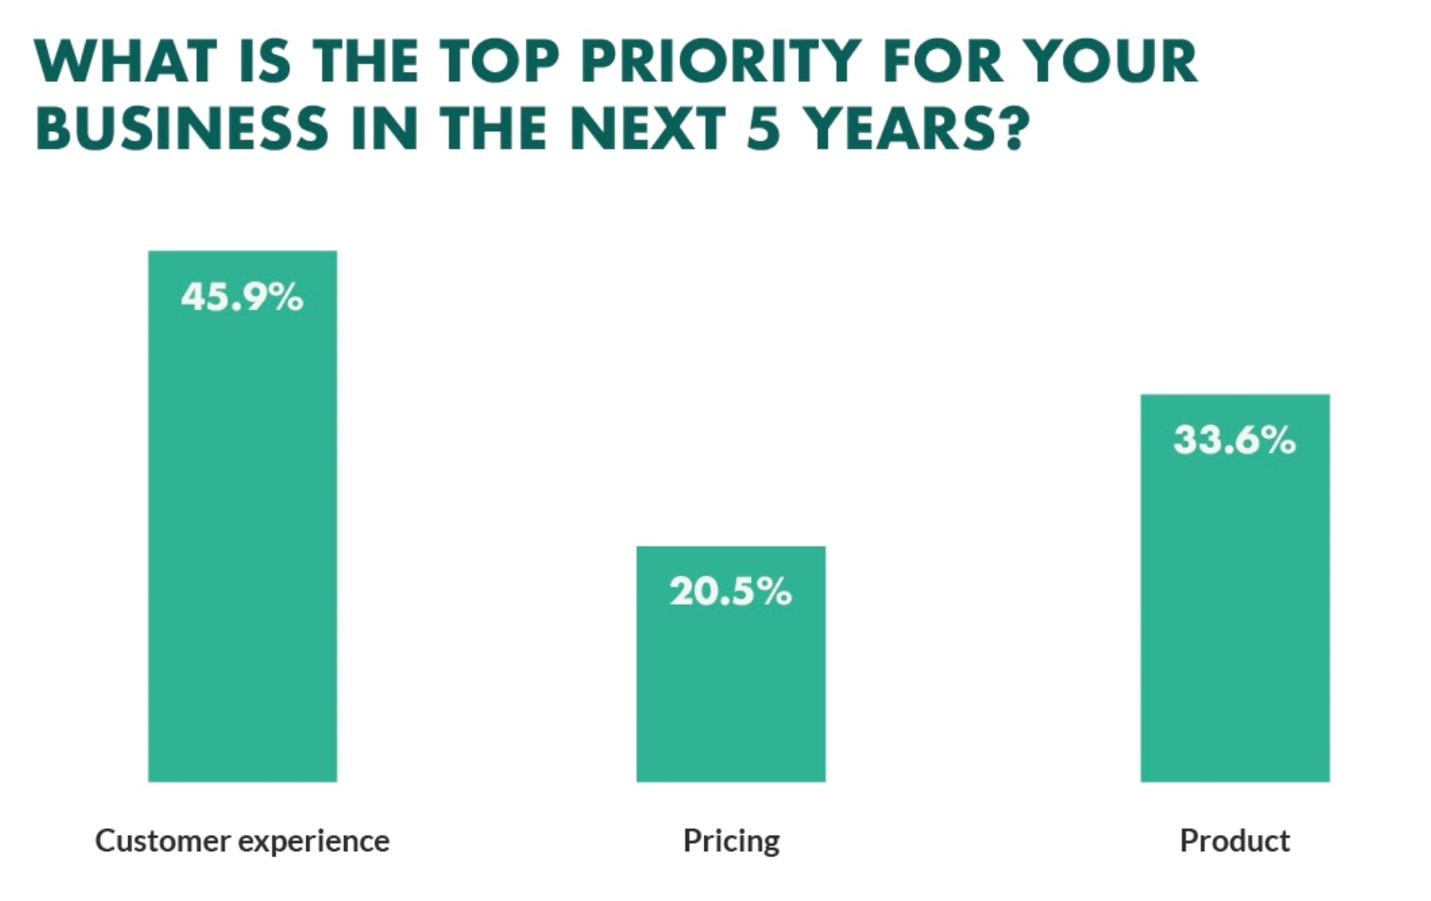 Customer experience is the top priority of 45.9% of businesses in 5 years.